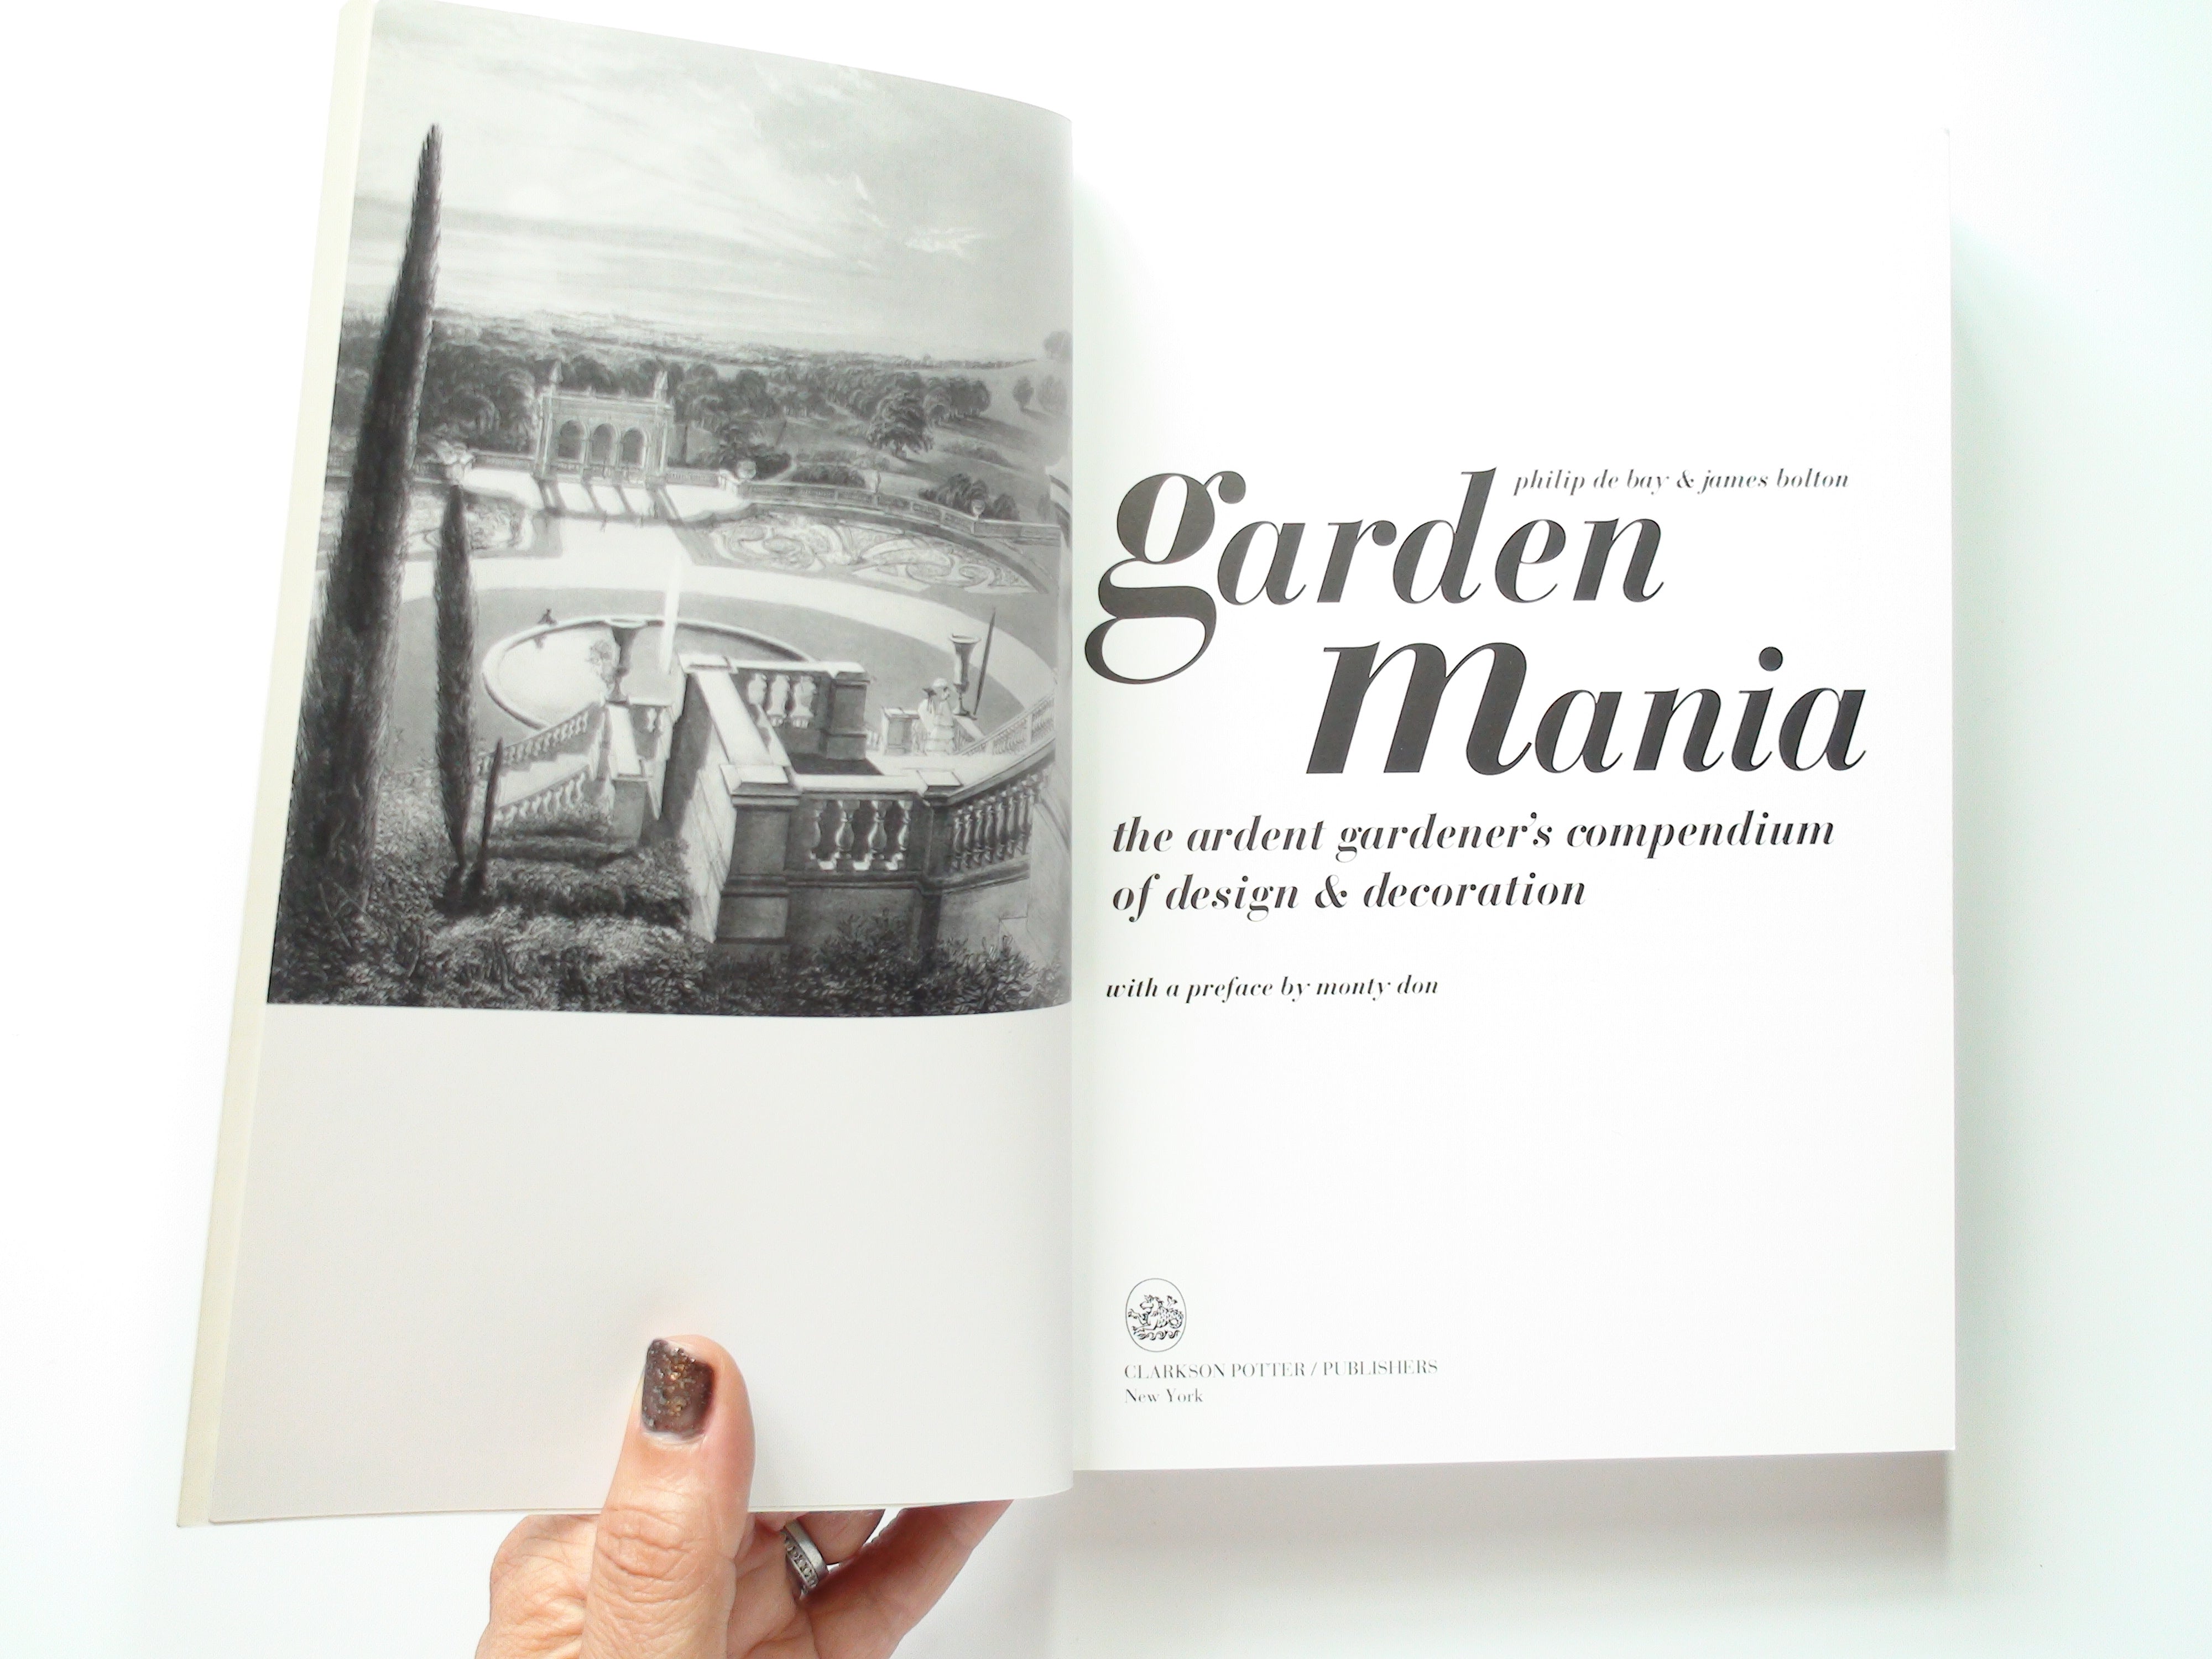 Garden Mania, Philip de Bay, Intro by Monty Don, Illustrated, 1st American Ed